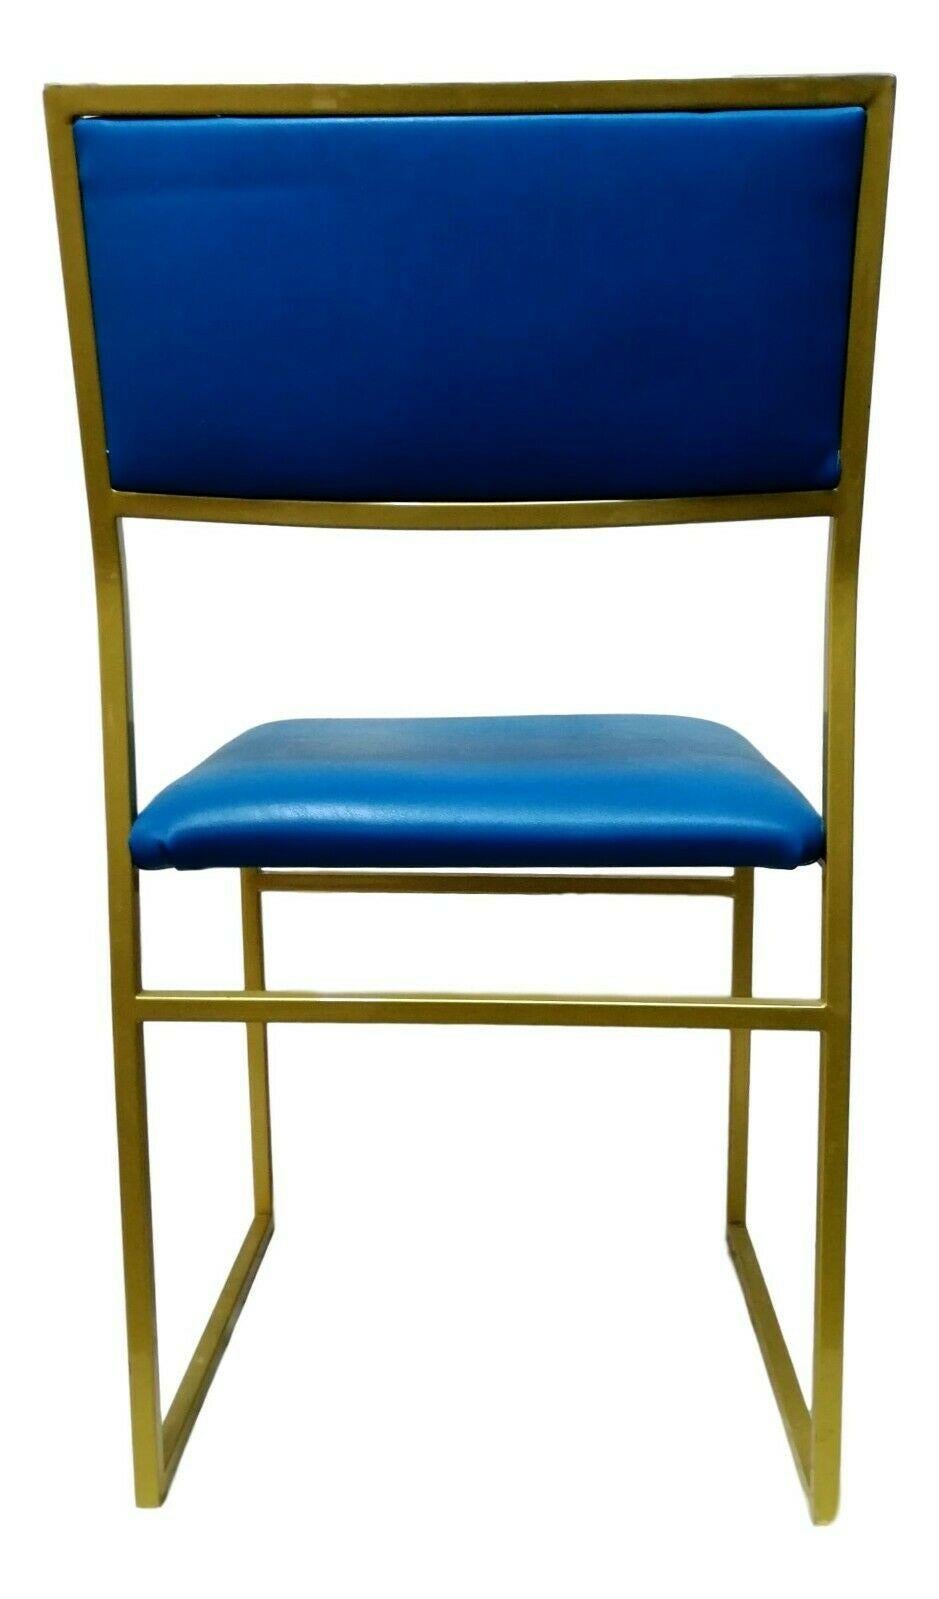 Original design chair from the 70s, made with a golden lacquered metal frame, seat and back upholstered in blue skay or chintz

Measures 78 cm in height, 42 cm in width, 50 cm in depth and 45 cm in height of the seat from the ground in very good